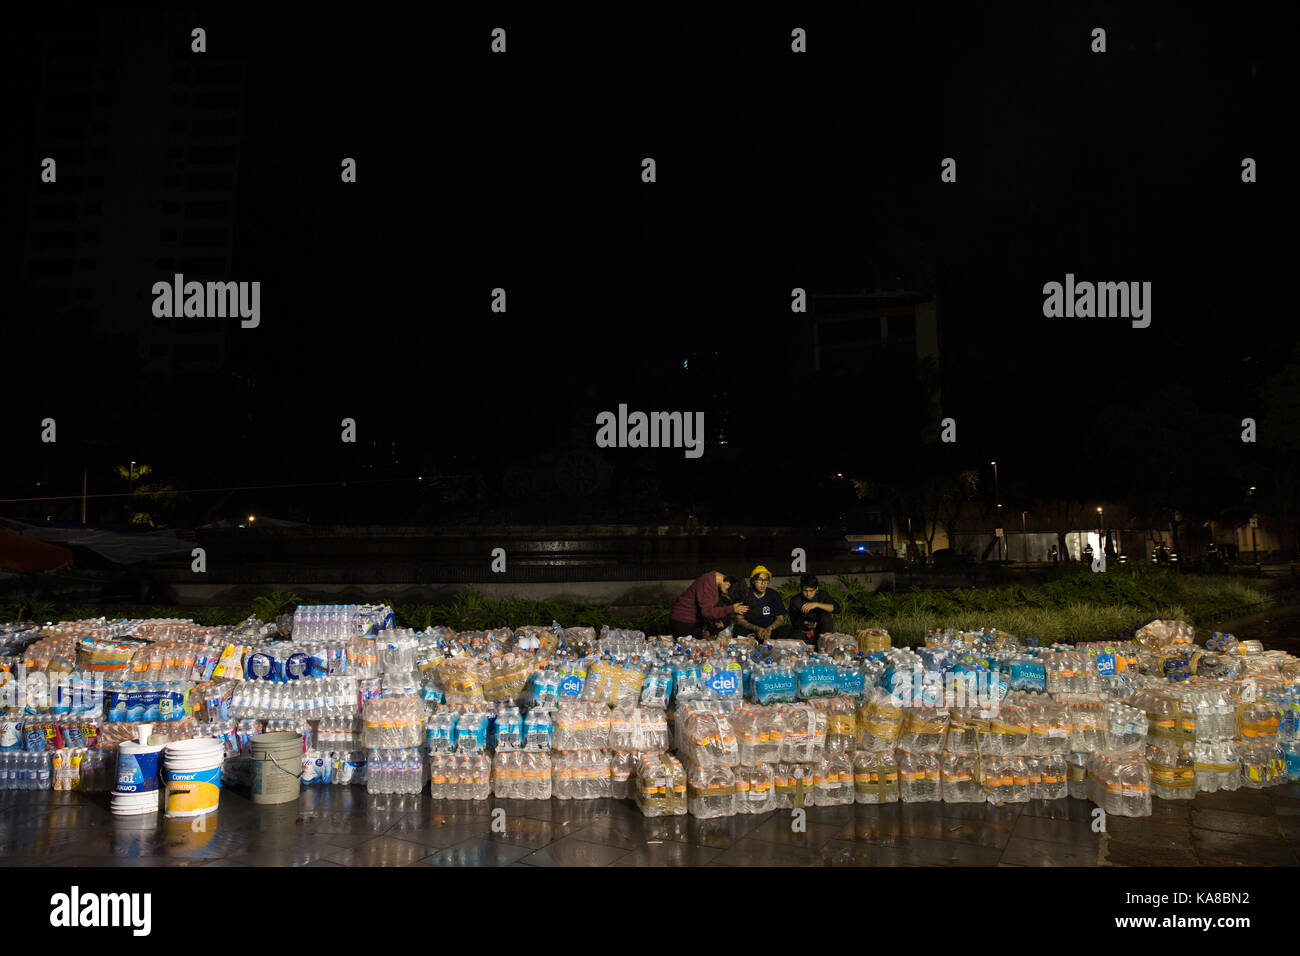 Volunteers organize bottled water and donated supplies at a collection point in Plaza de Cibeles in Mexico City, Mexico on September 21, 2017. On September 19, 2017, a 7.1 magnitude earthquake rocked Central Mexico, killing more than 200 hundreds people and causing serious damage to buildings in the capital. The worst earthquake in the history of Mexico occurred on September 19, 1985, killing nearly 10,000 people. (Photo by Bénédicte Desrus) Stock Photo